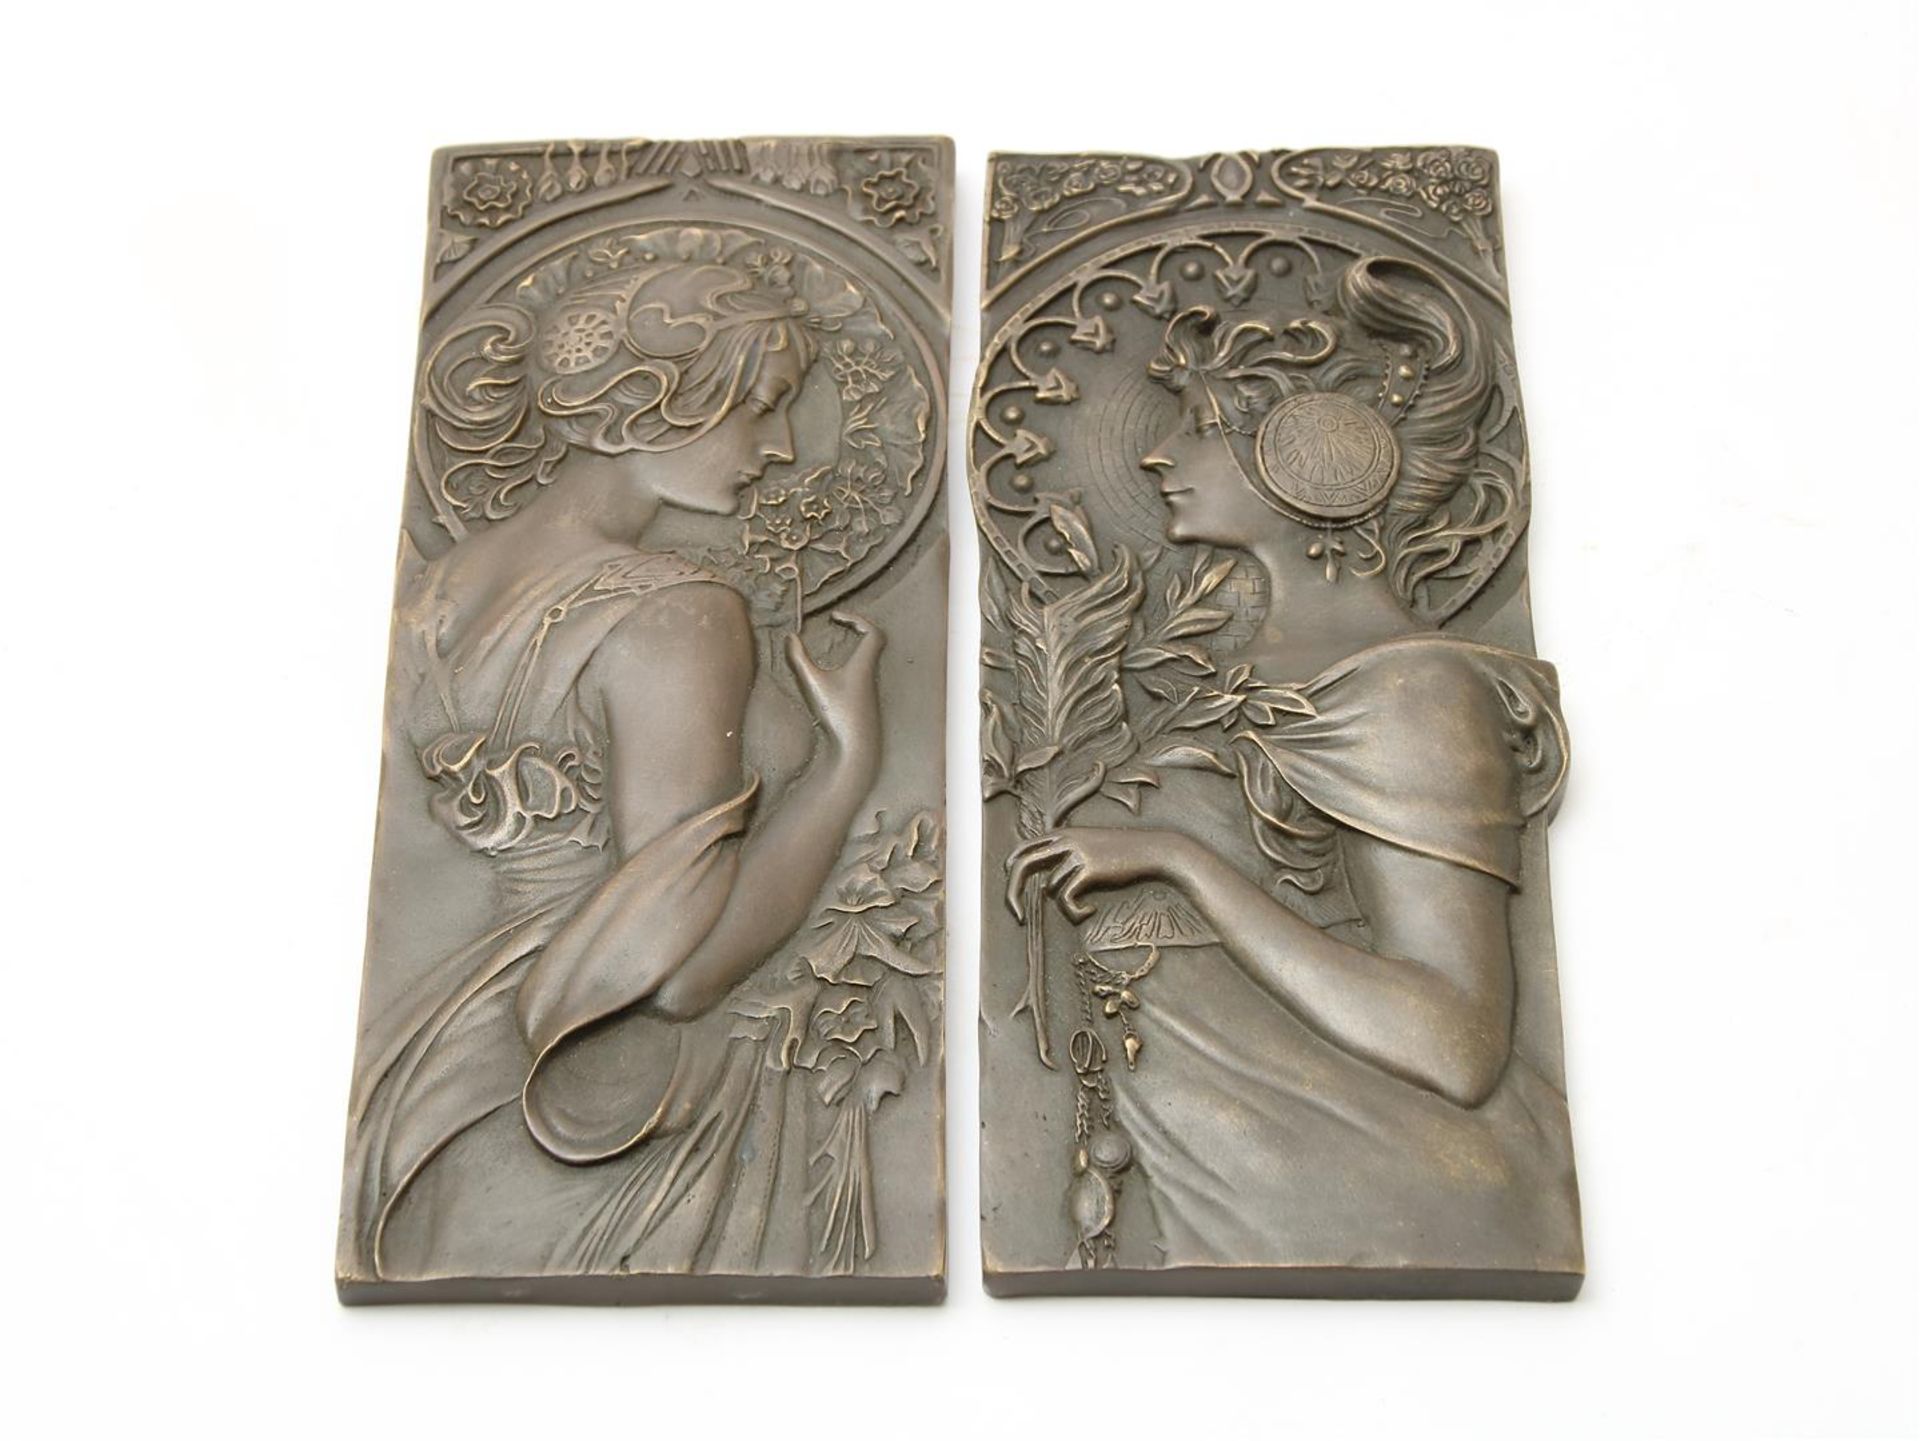 Set of bronze Art Nouveau-style plaques with relief decor of female figures, after Mucha, 23 x 9